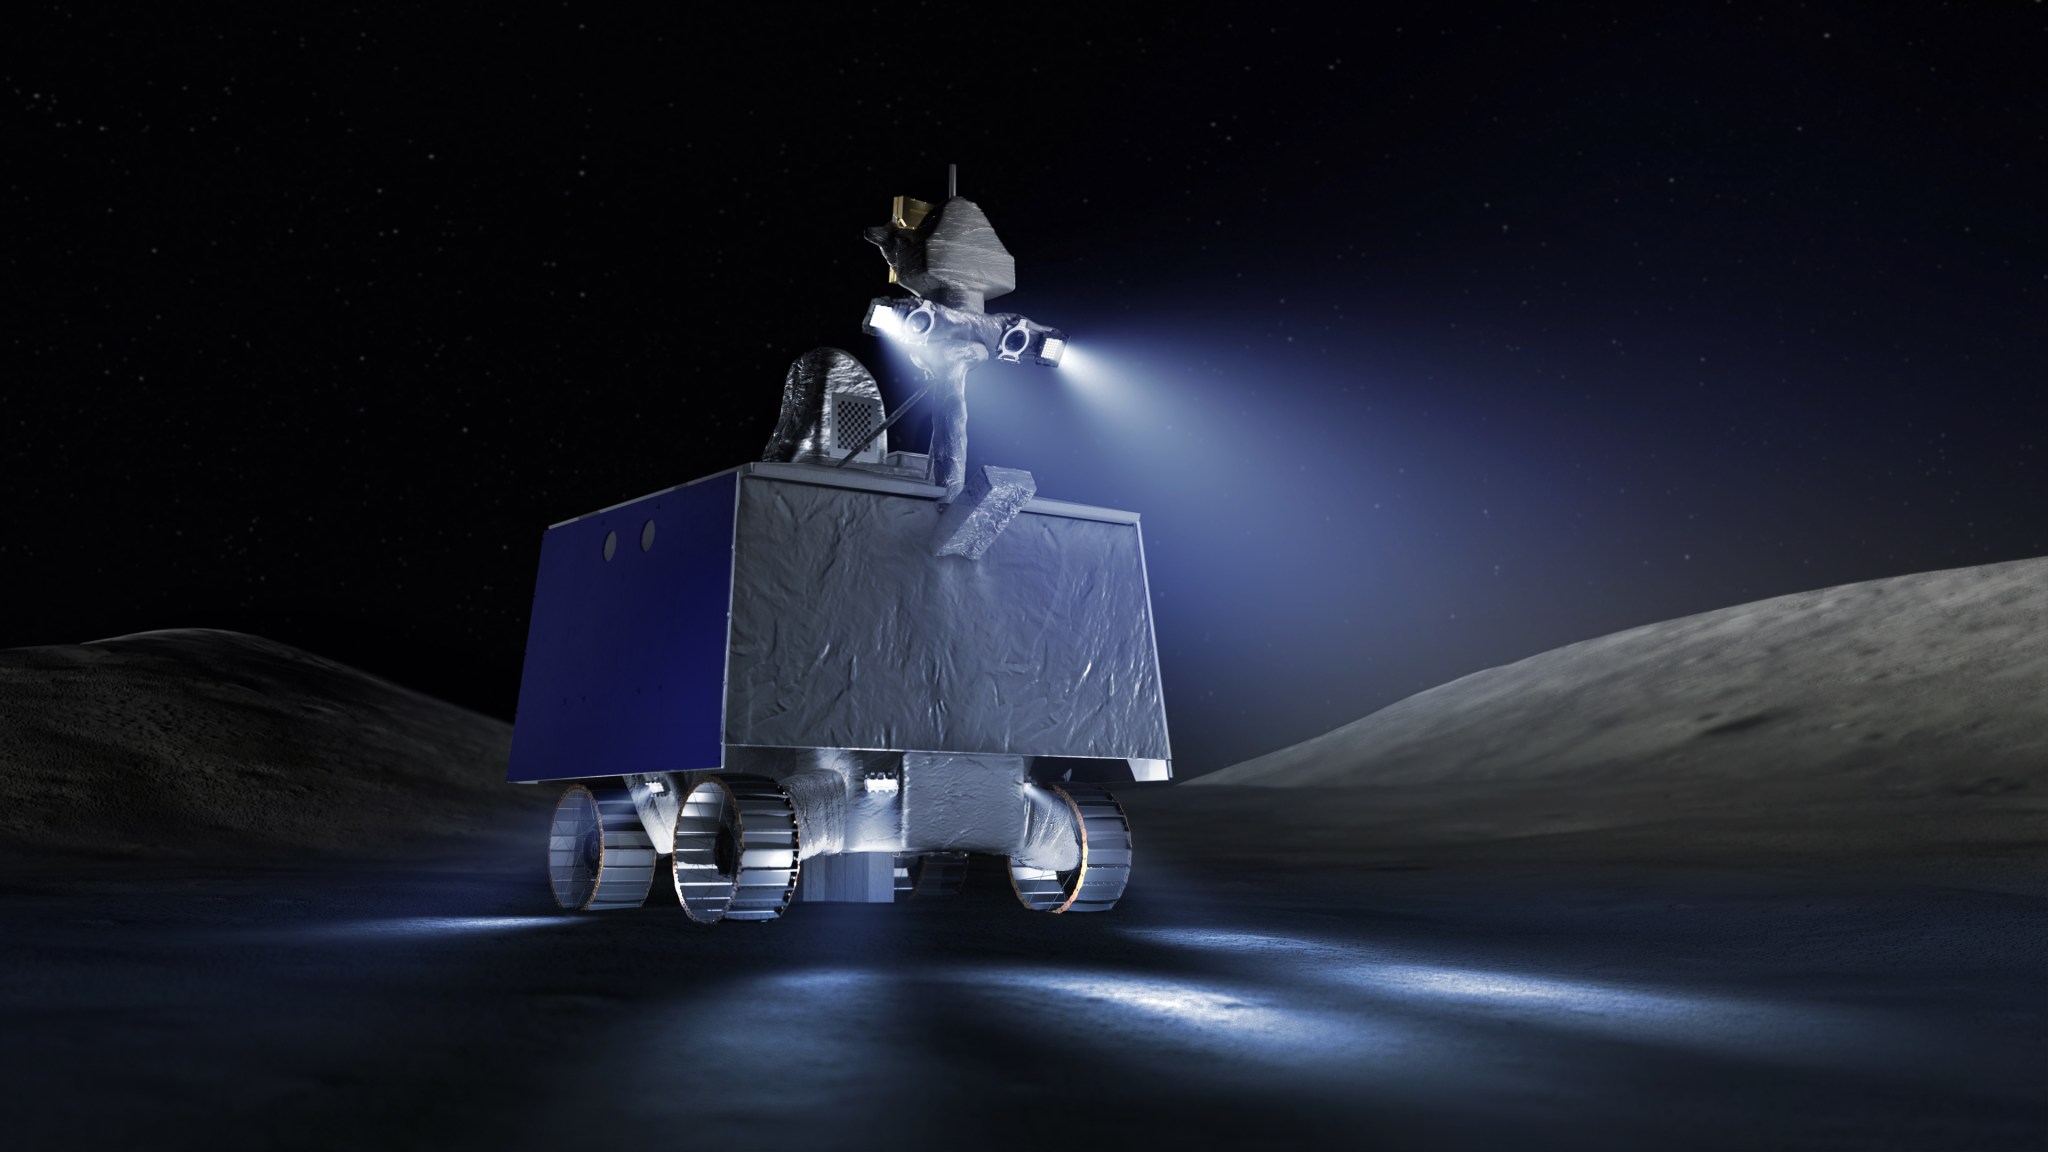 A box-shaped rover with four wheels on the surface of the Moon, with lights illuminating the path before it.